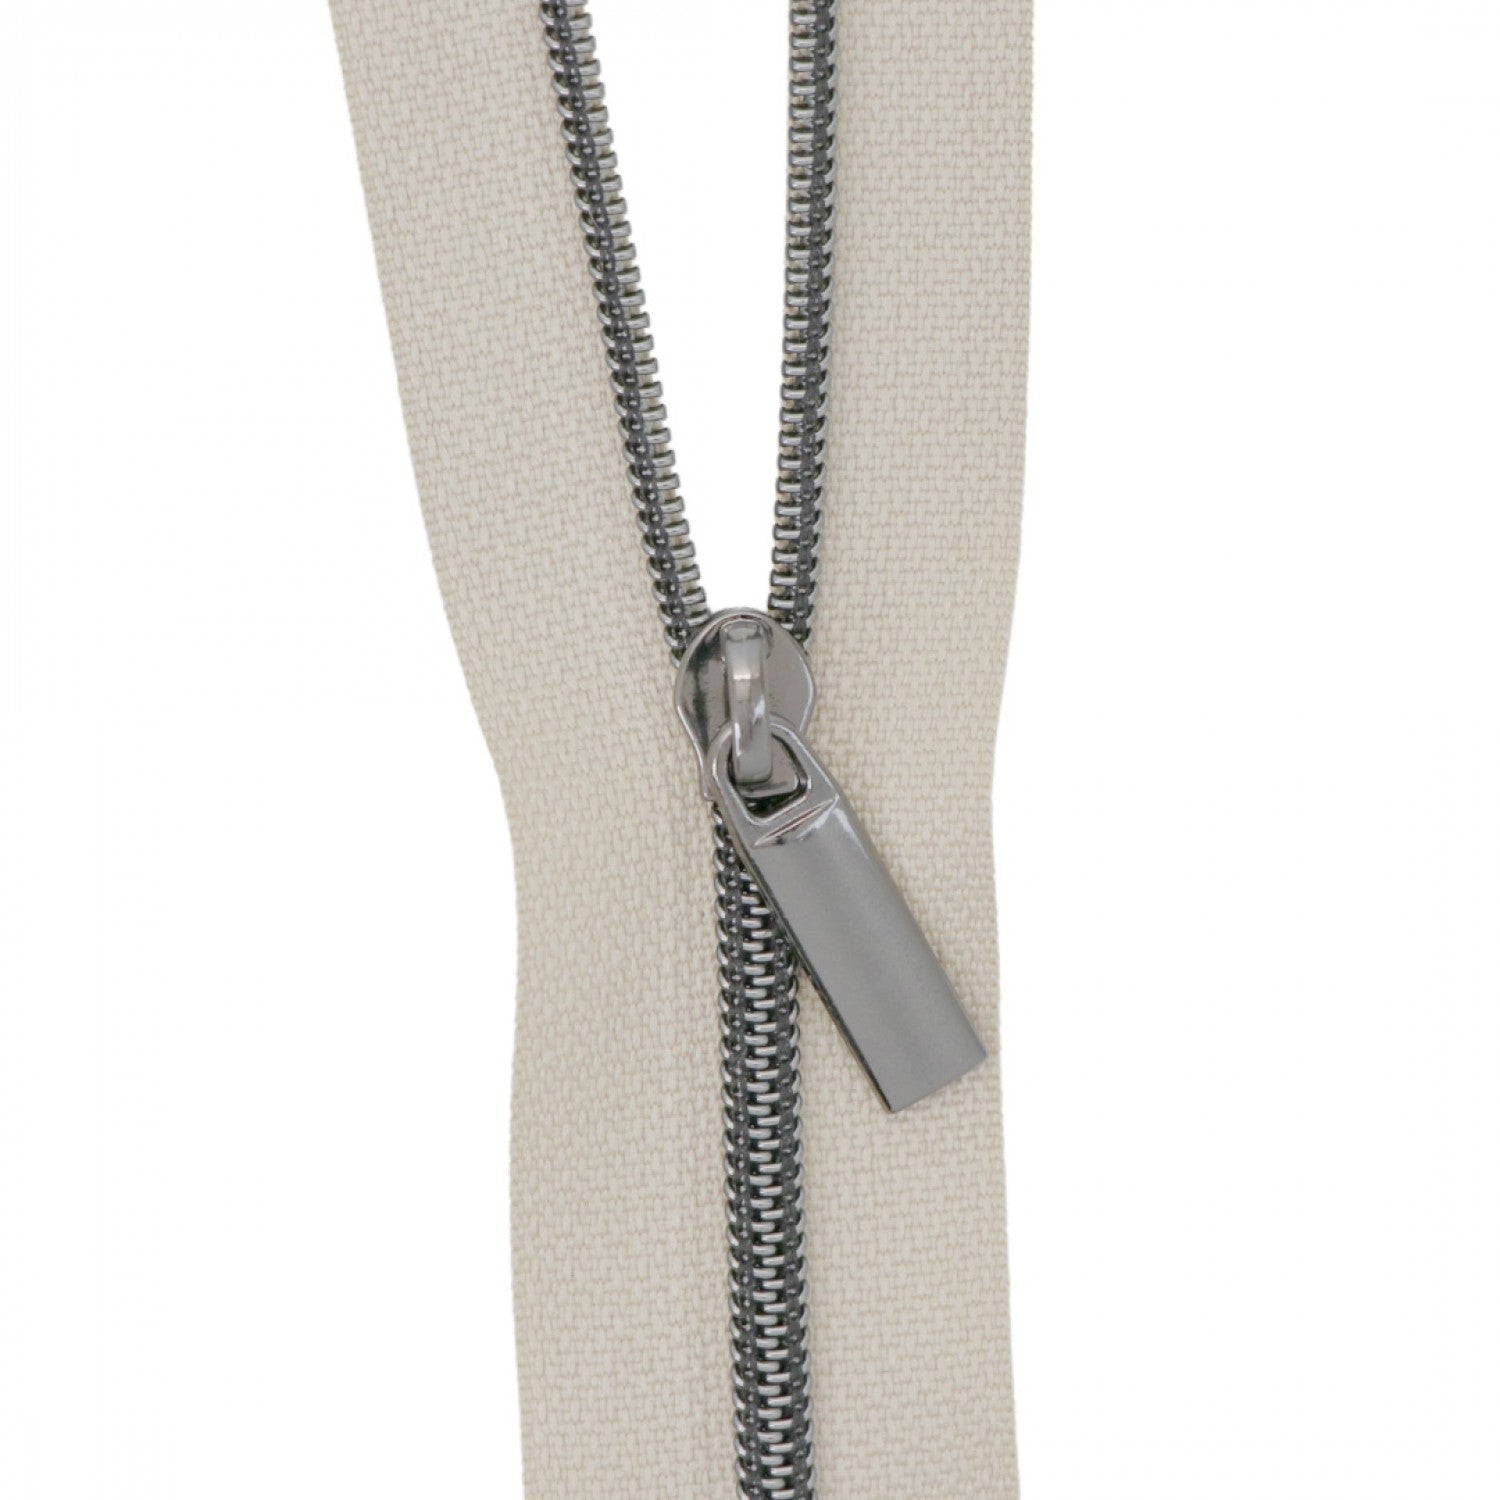 Grey #5 Nylon Gunmetal Coil Zippers: 3 Yards with 9 Pulls